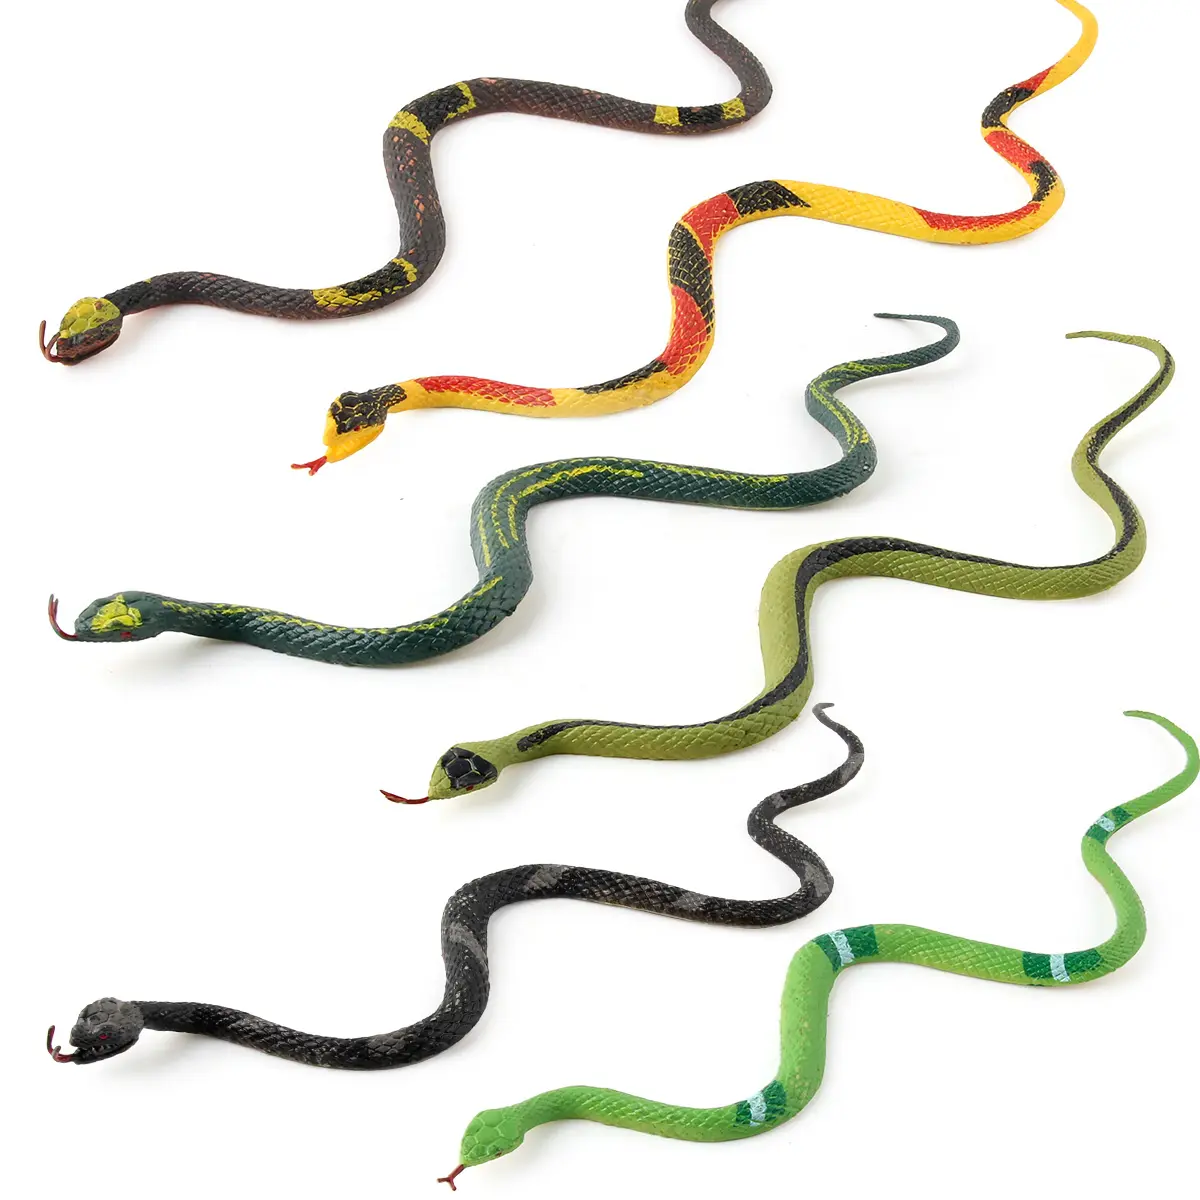 12 scary Rubber Snakes 14 inch long wholesale 99 cents each NEW! wholesale lot 